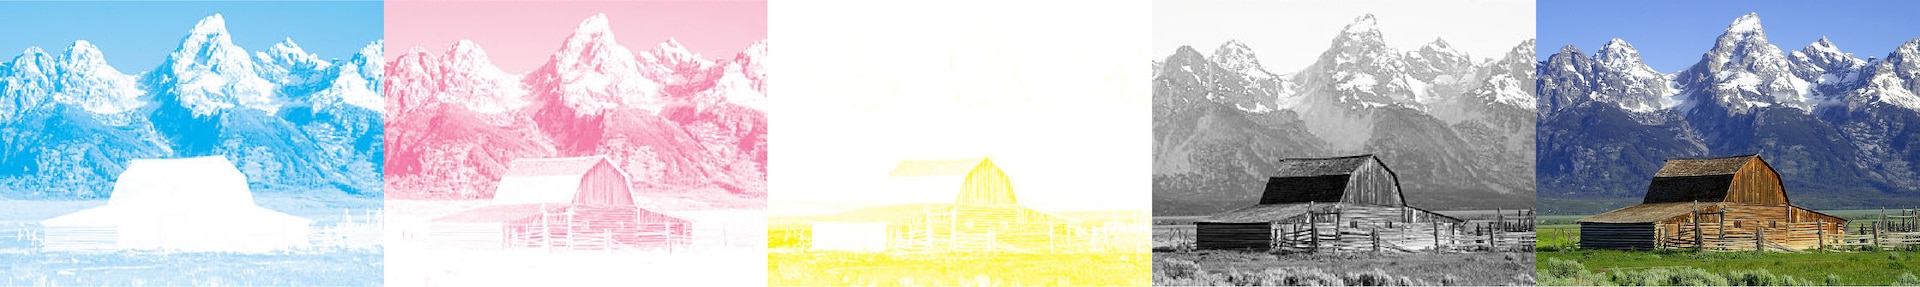 A full-color photograph of a barn with mountains in the background that shows separations used for printing with process cyan, magenta and yellow inks.